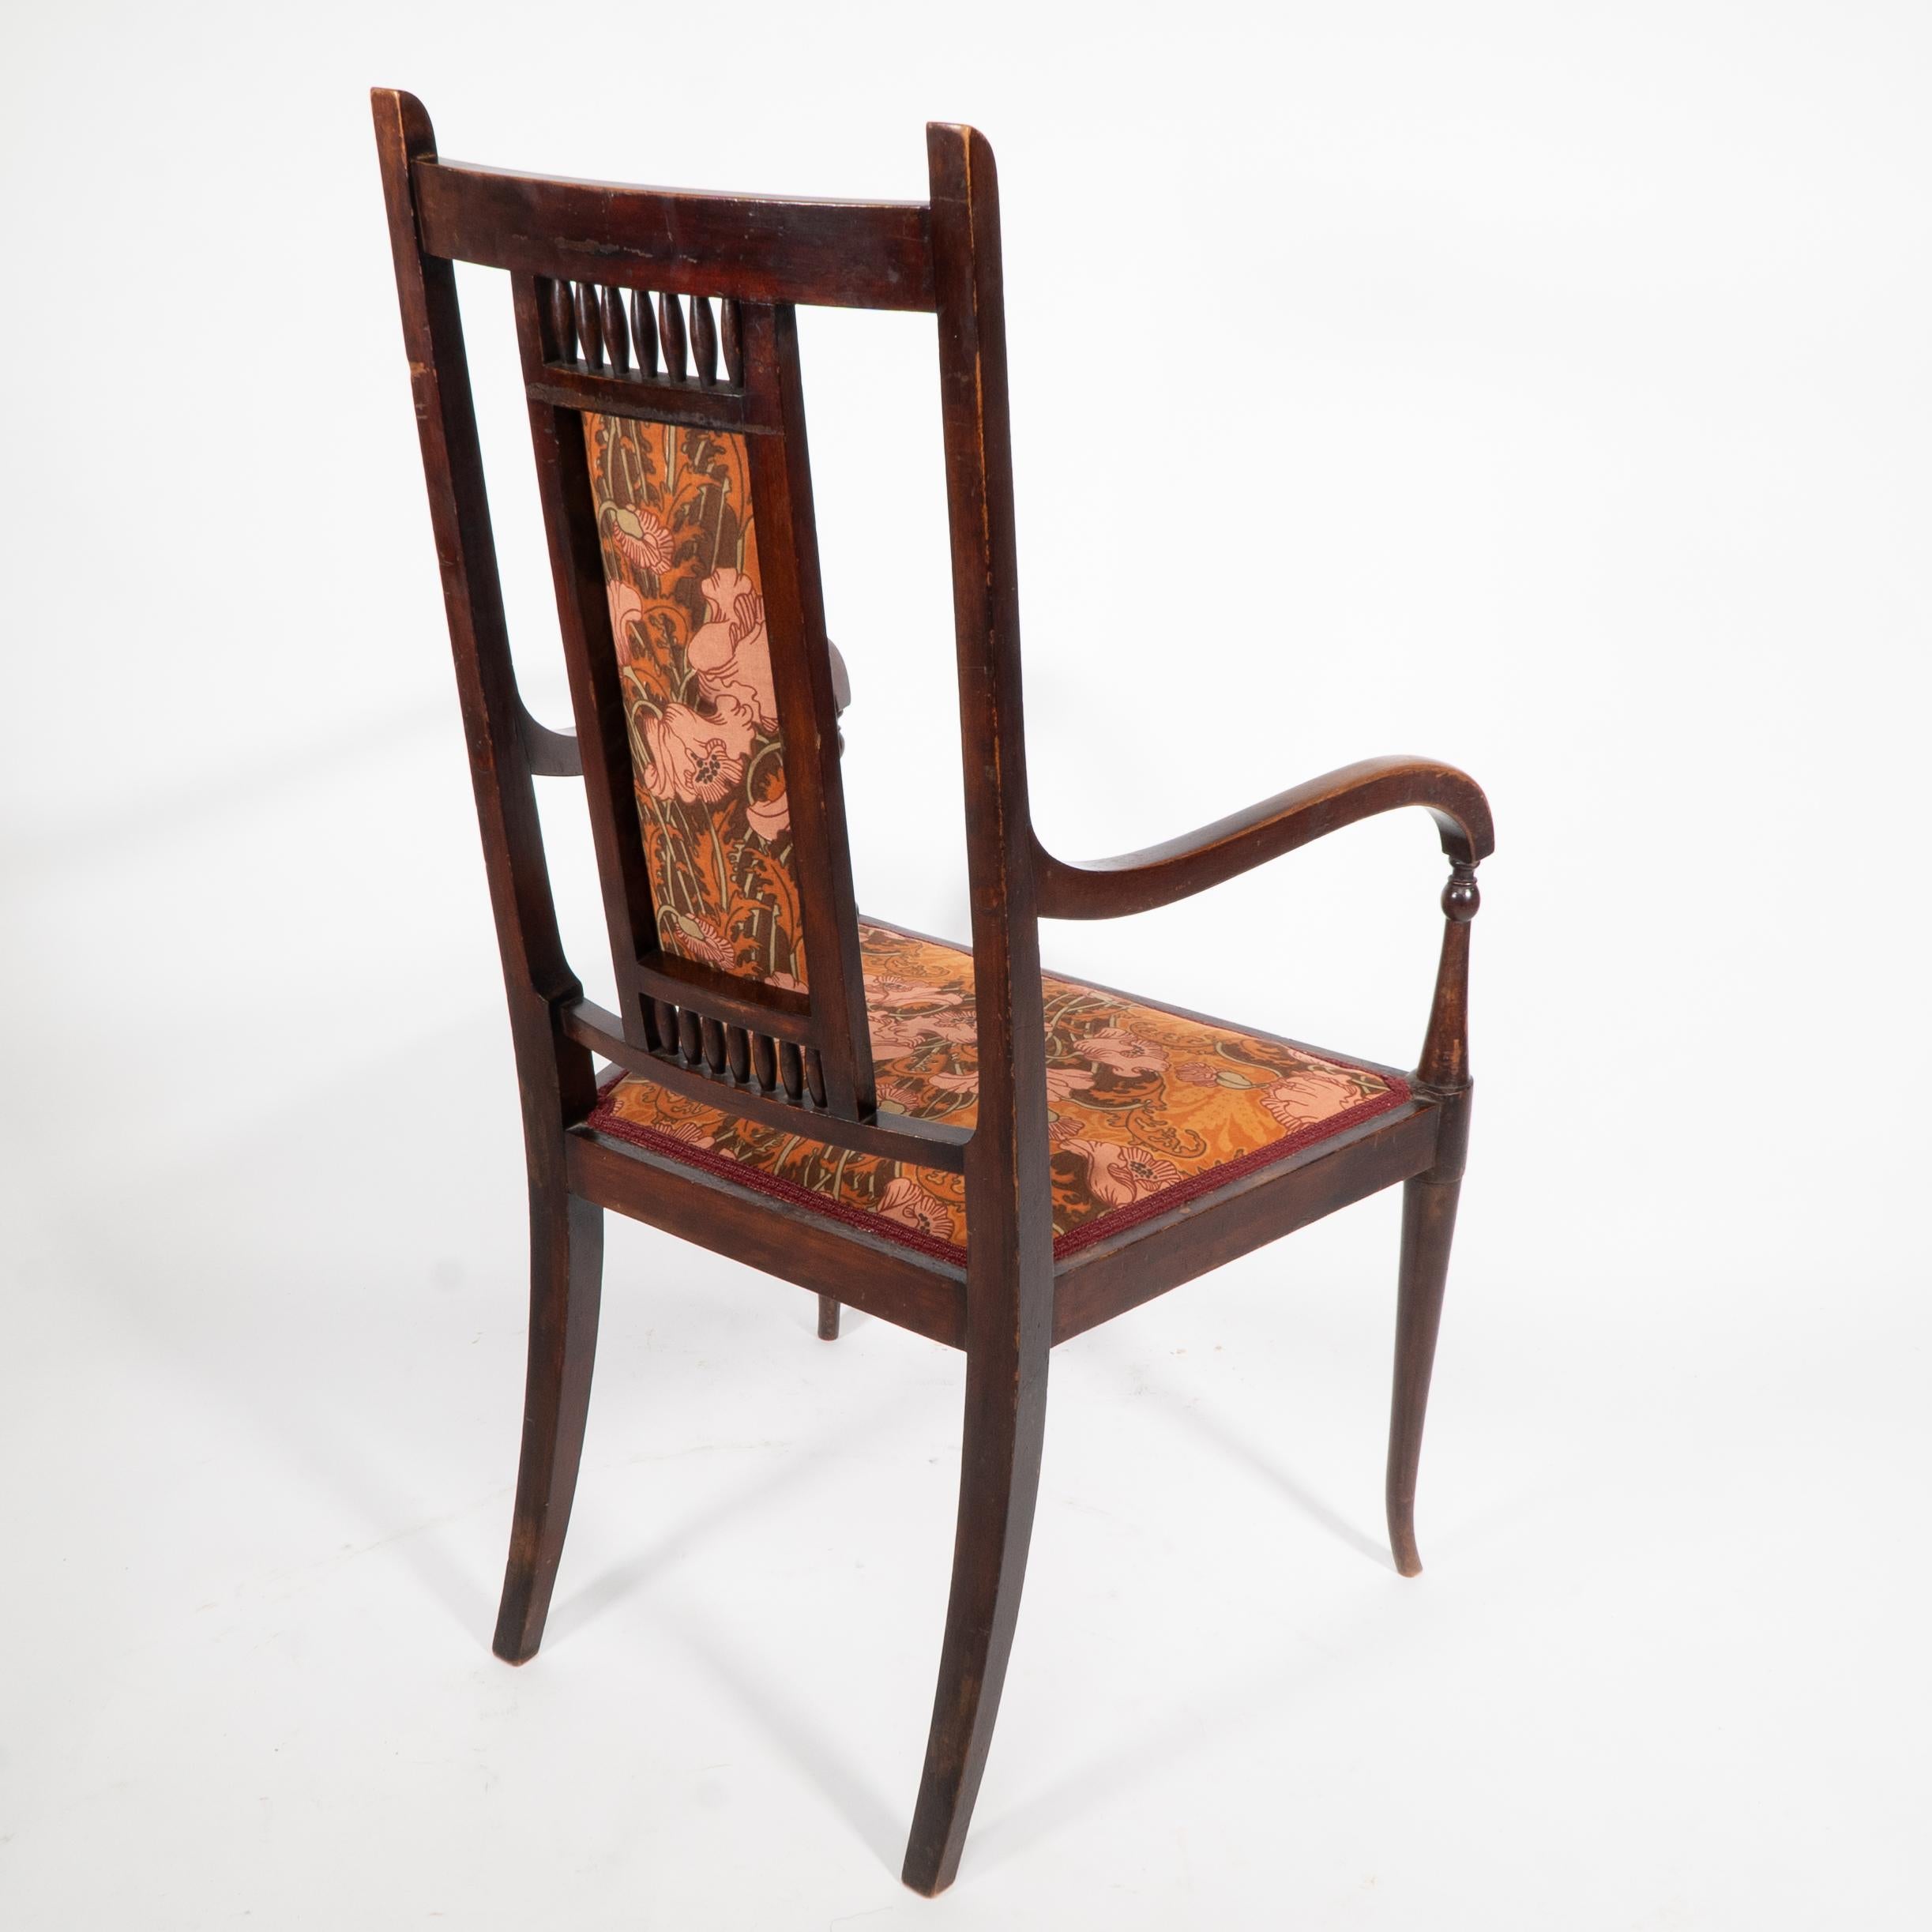 George Walton for John Rowntree's cafe. An Arts and Crafts walnut armchair For Sale 12